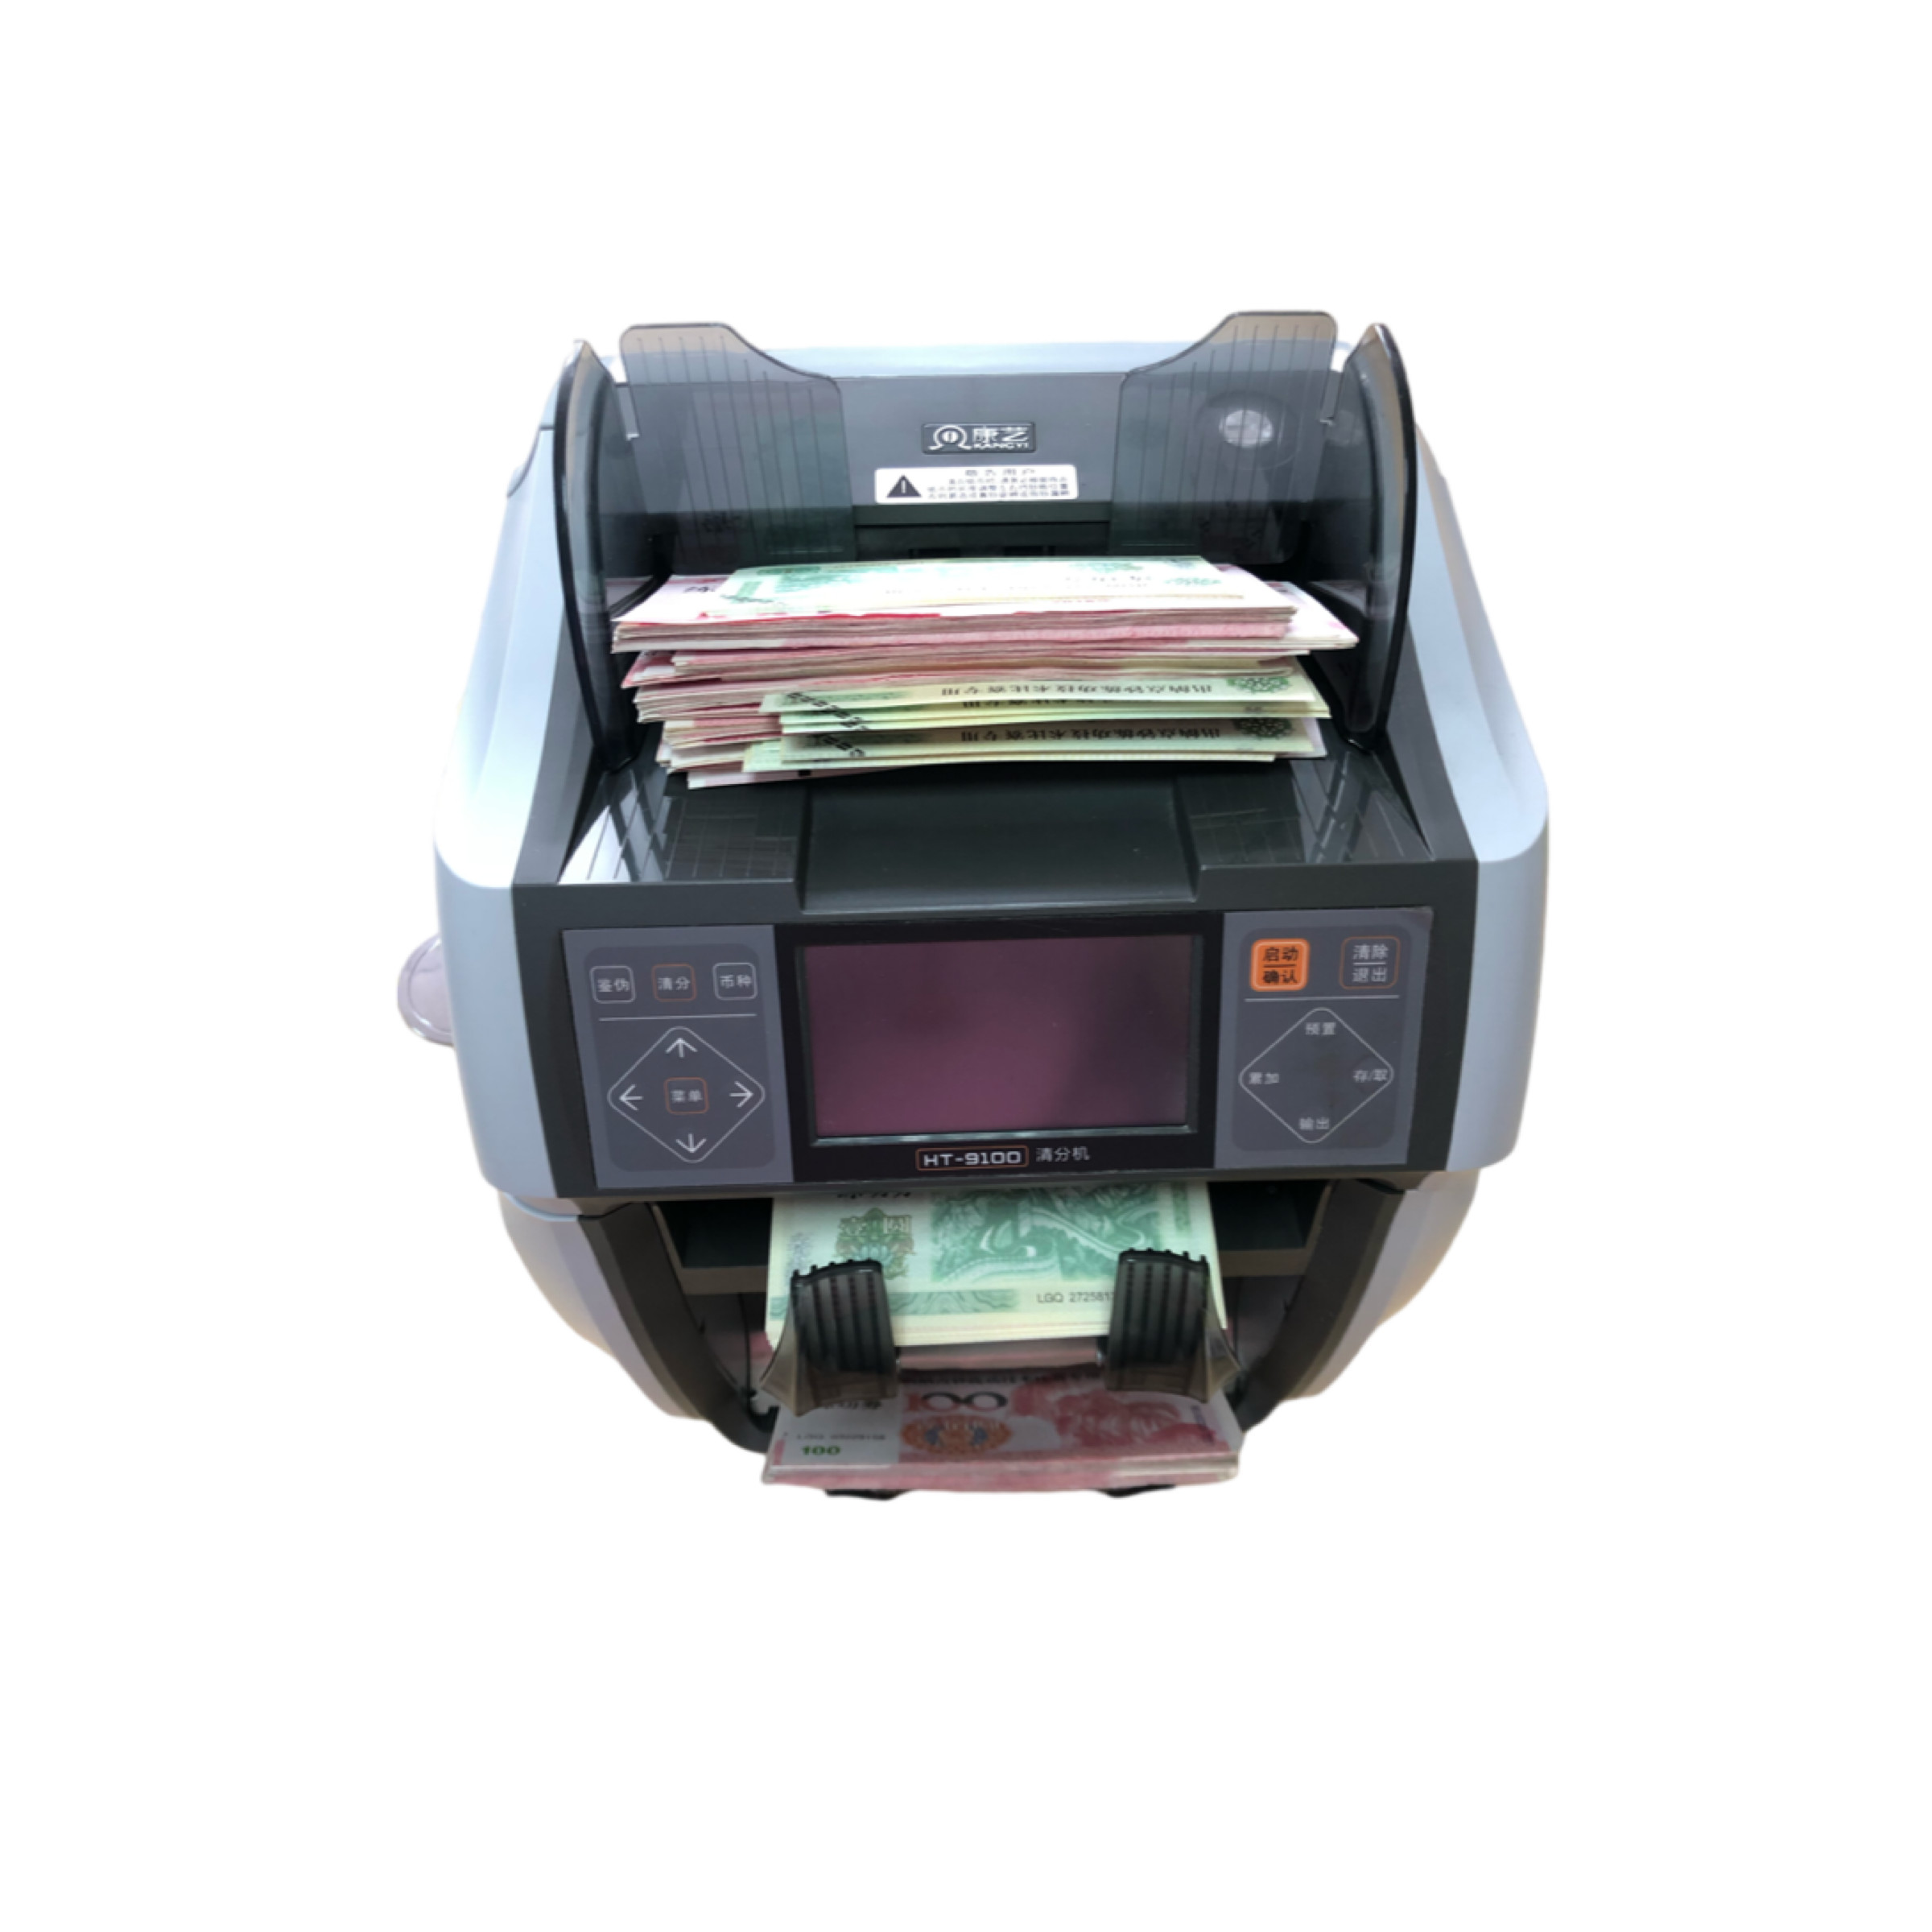 Indian USD Euro Currency Counting Machine With Fake Note Detector 50W for sale